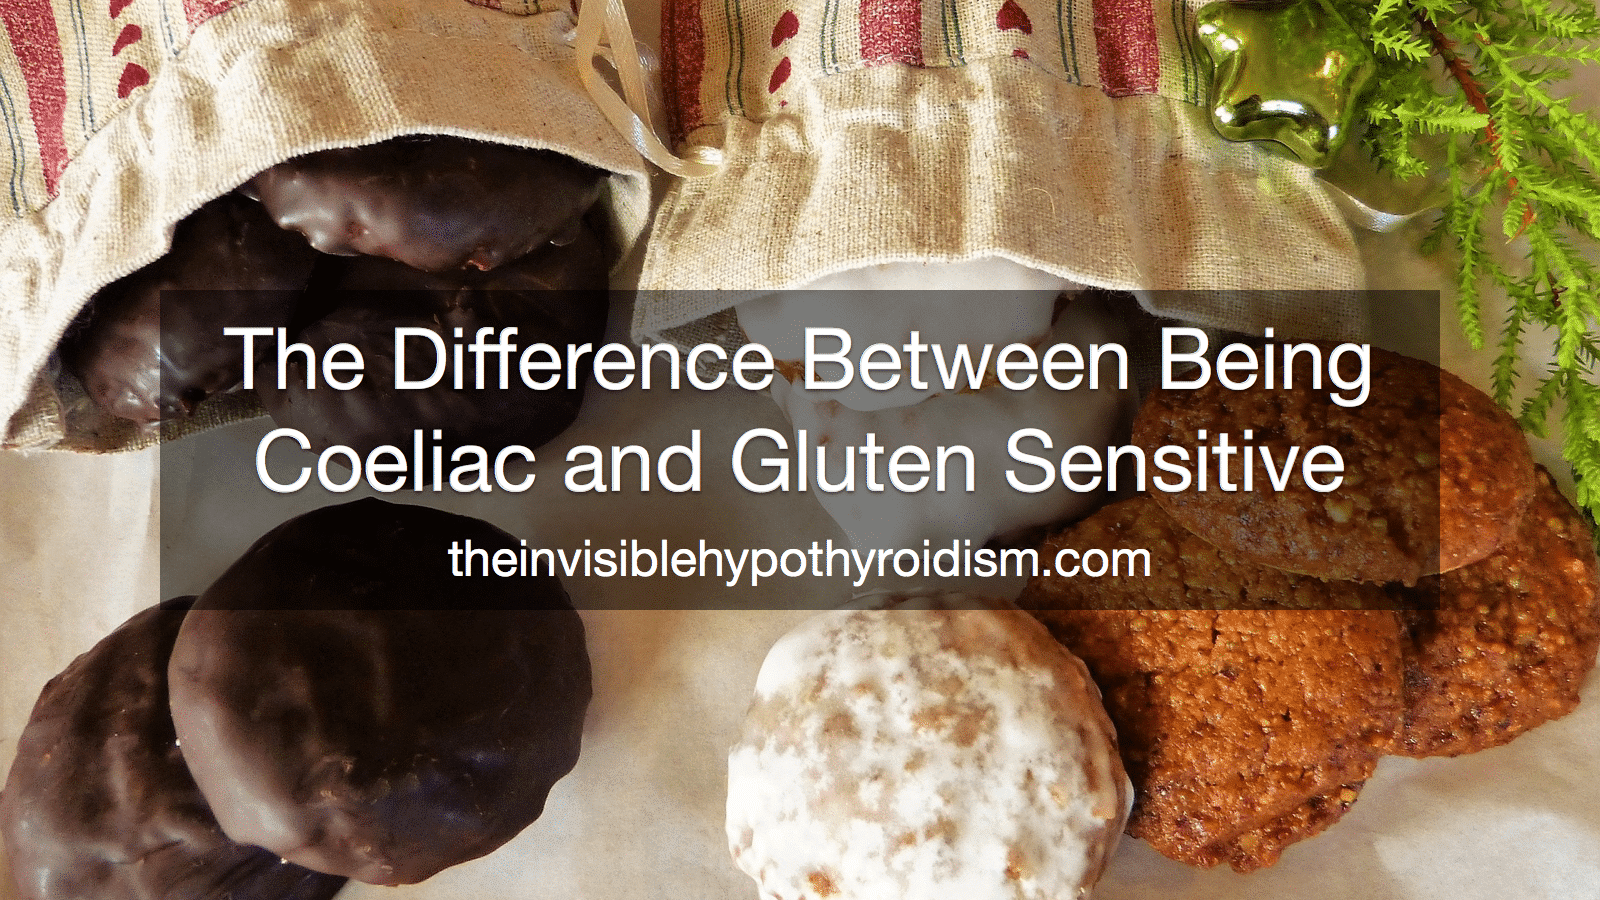 The Difference Between Being Coeliac and Gluten Sensitive